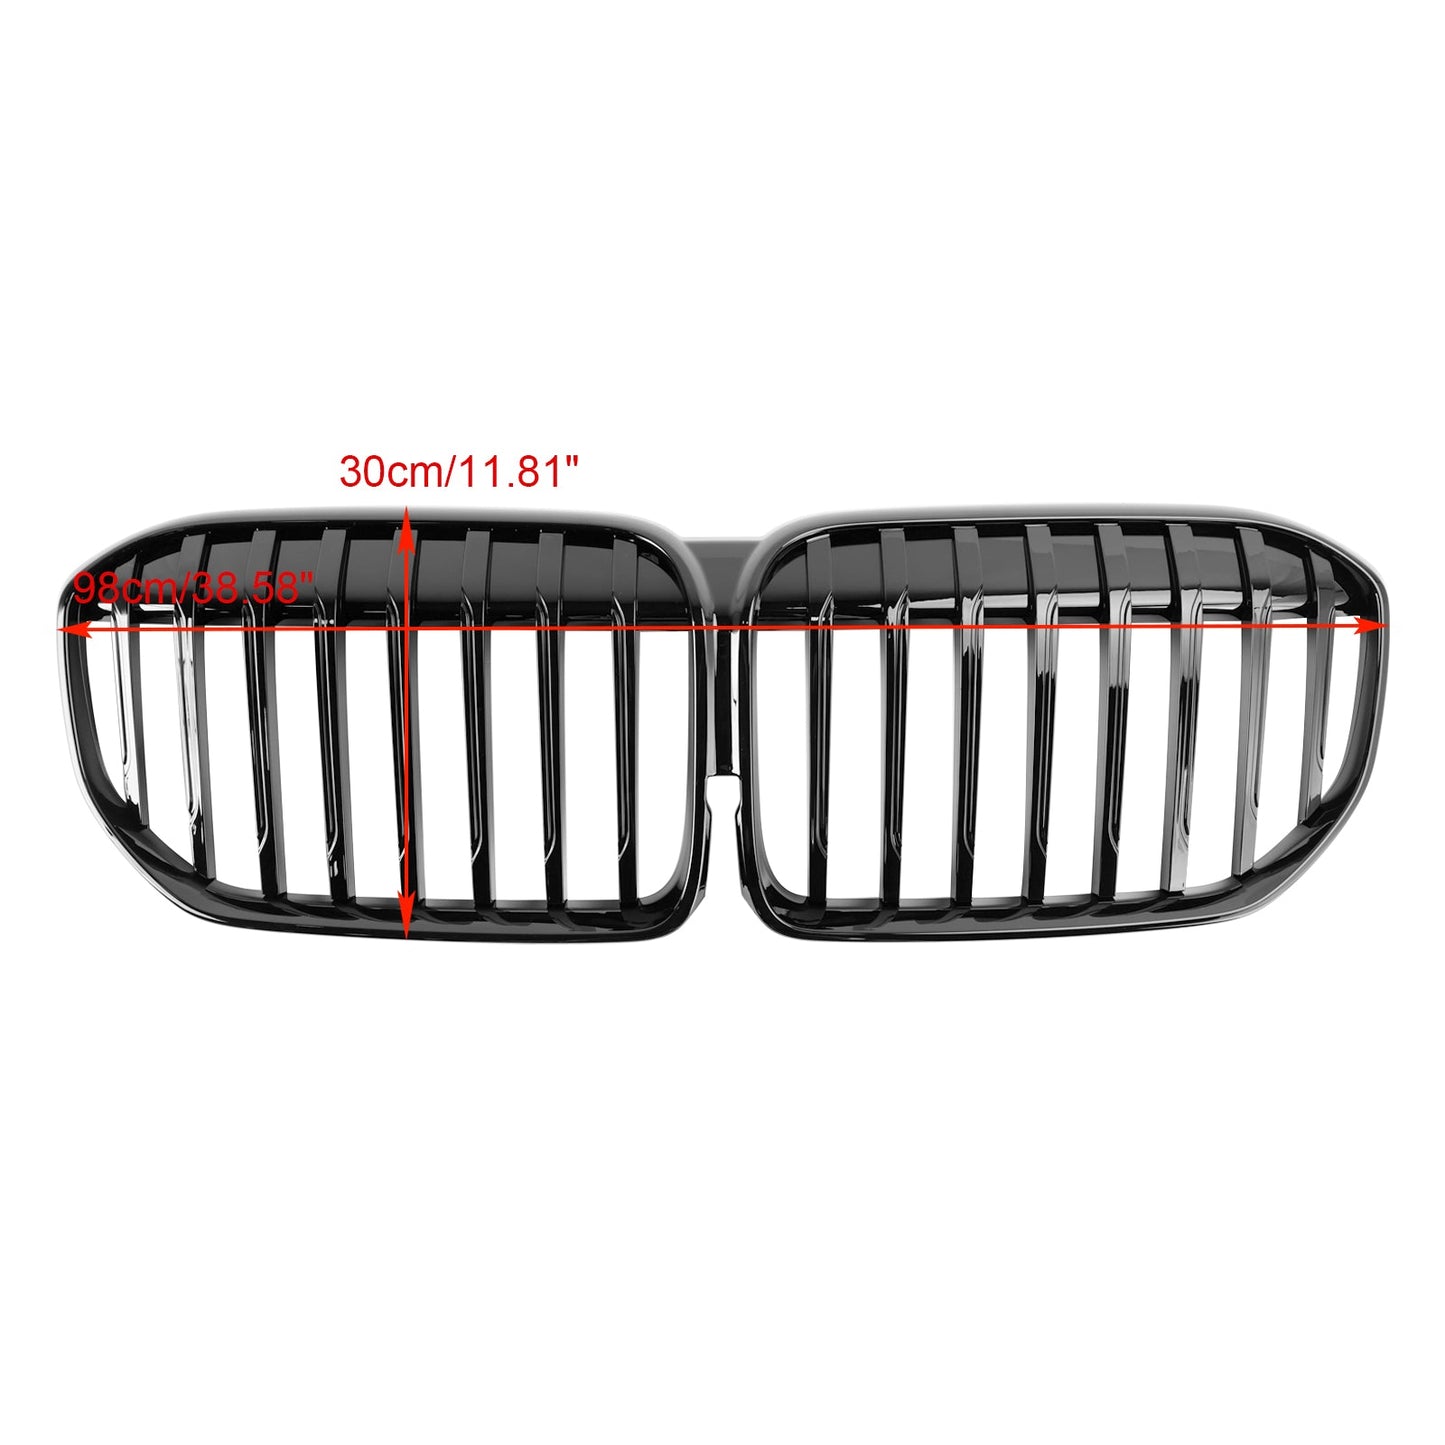 2019-2022 BMW 7 Series G11 G12 Single Slat Gloss Black Front Grill Grille